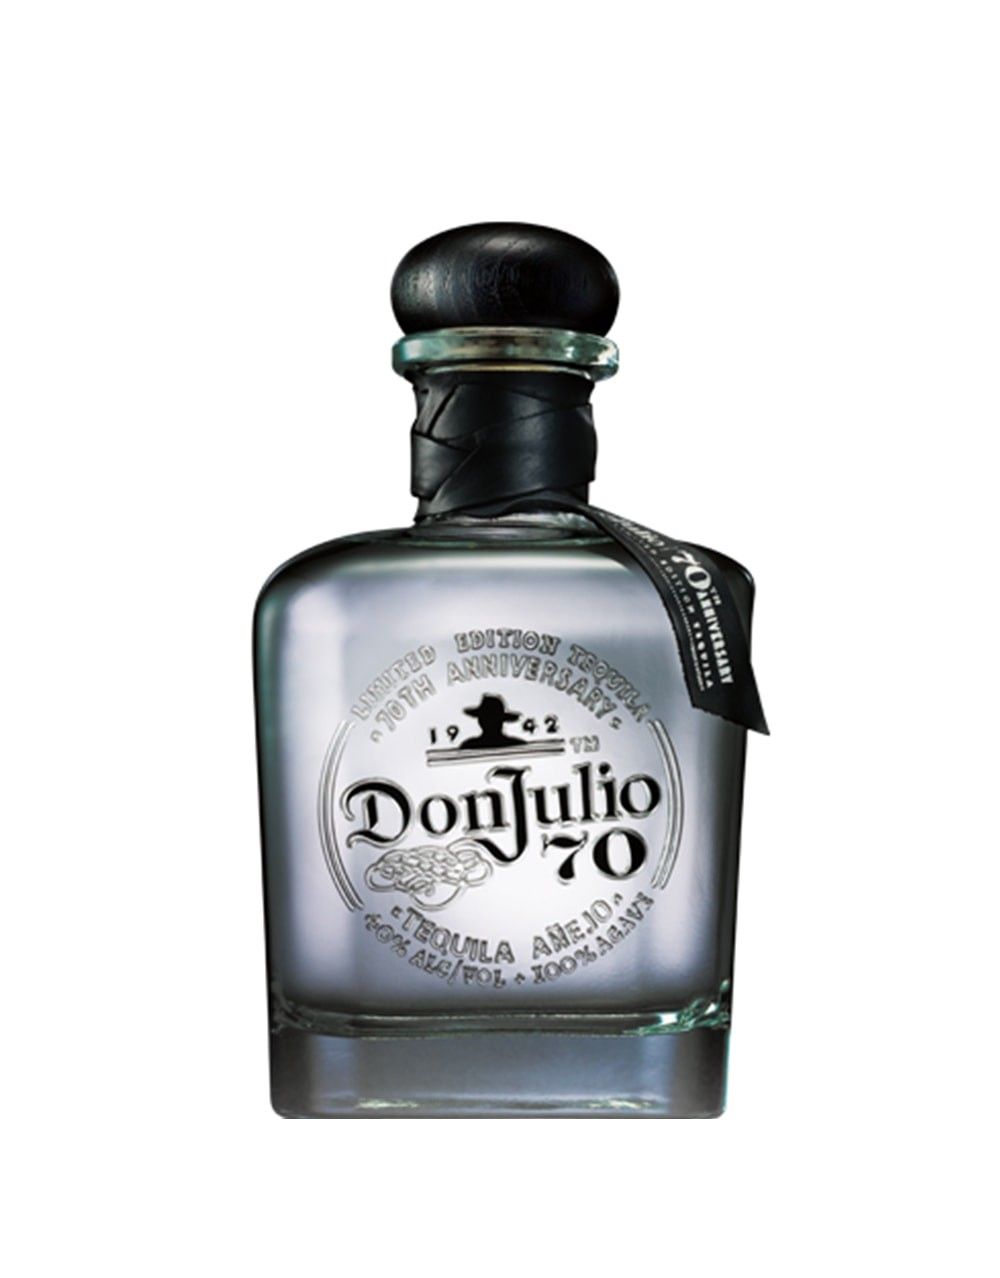 Don Julio 70 Tequila Buy Online or Send as a Gift ReserveBar